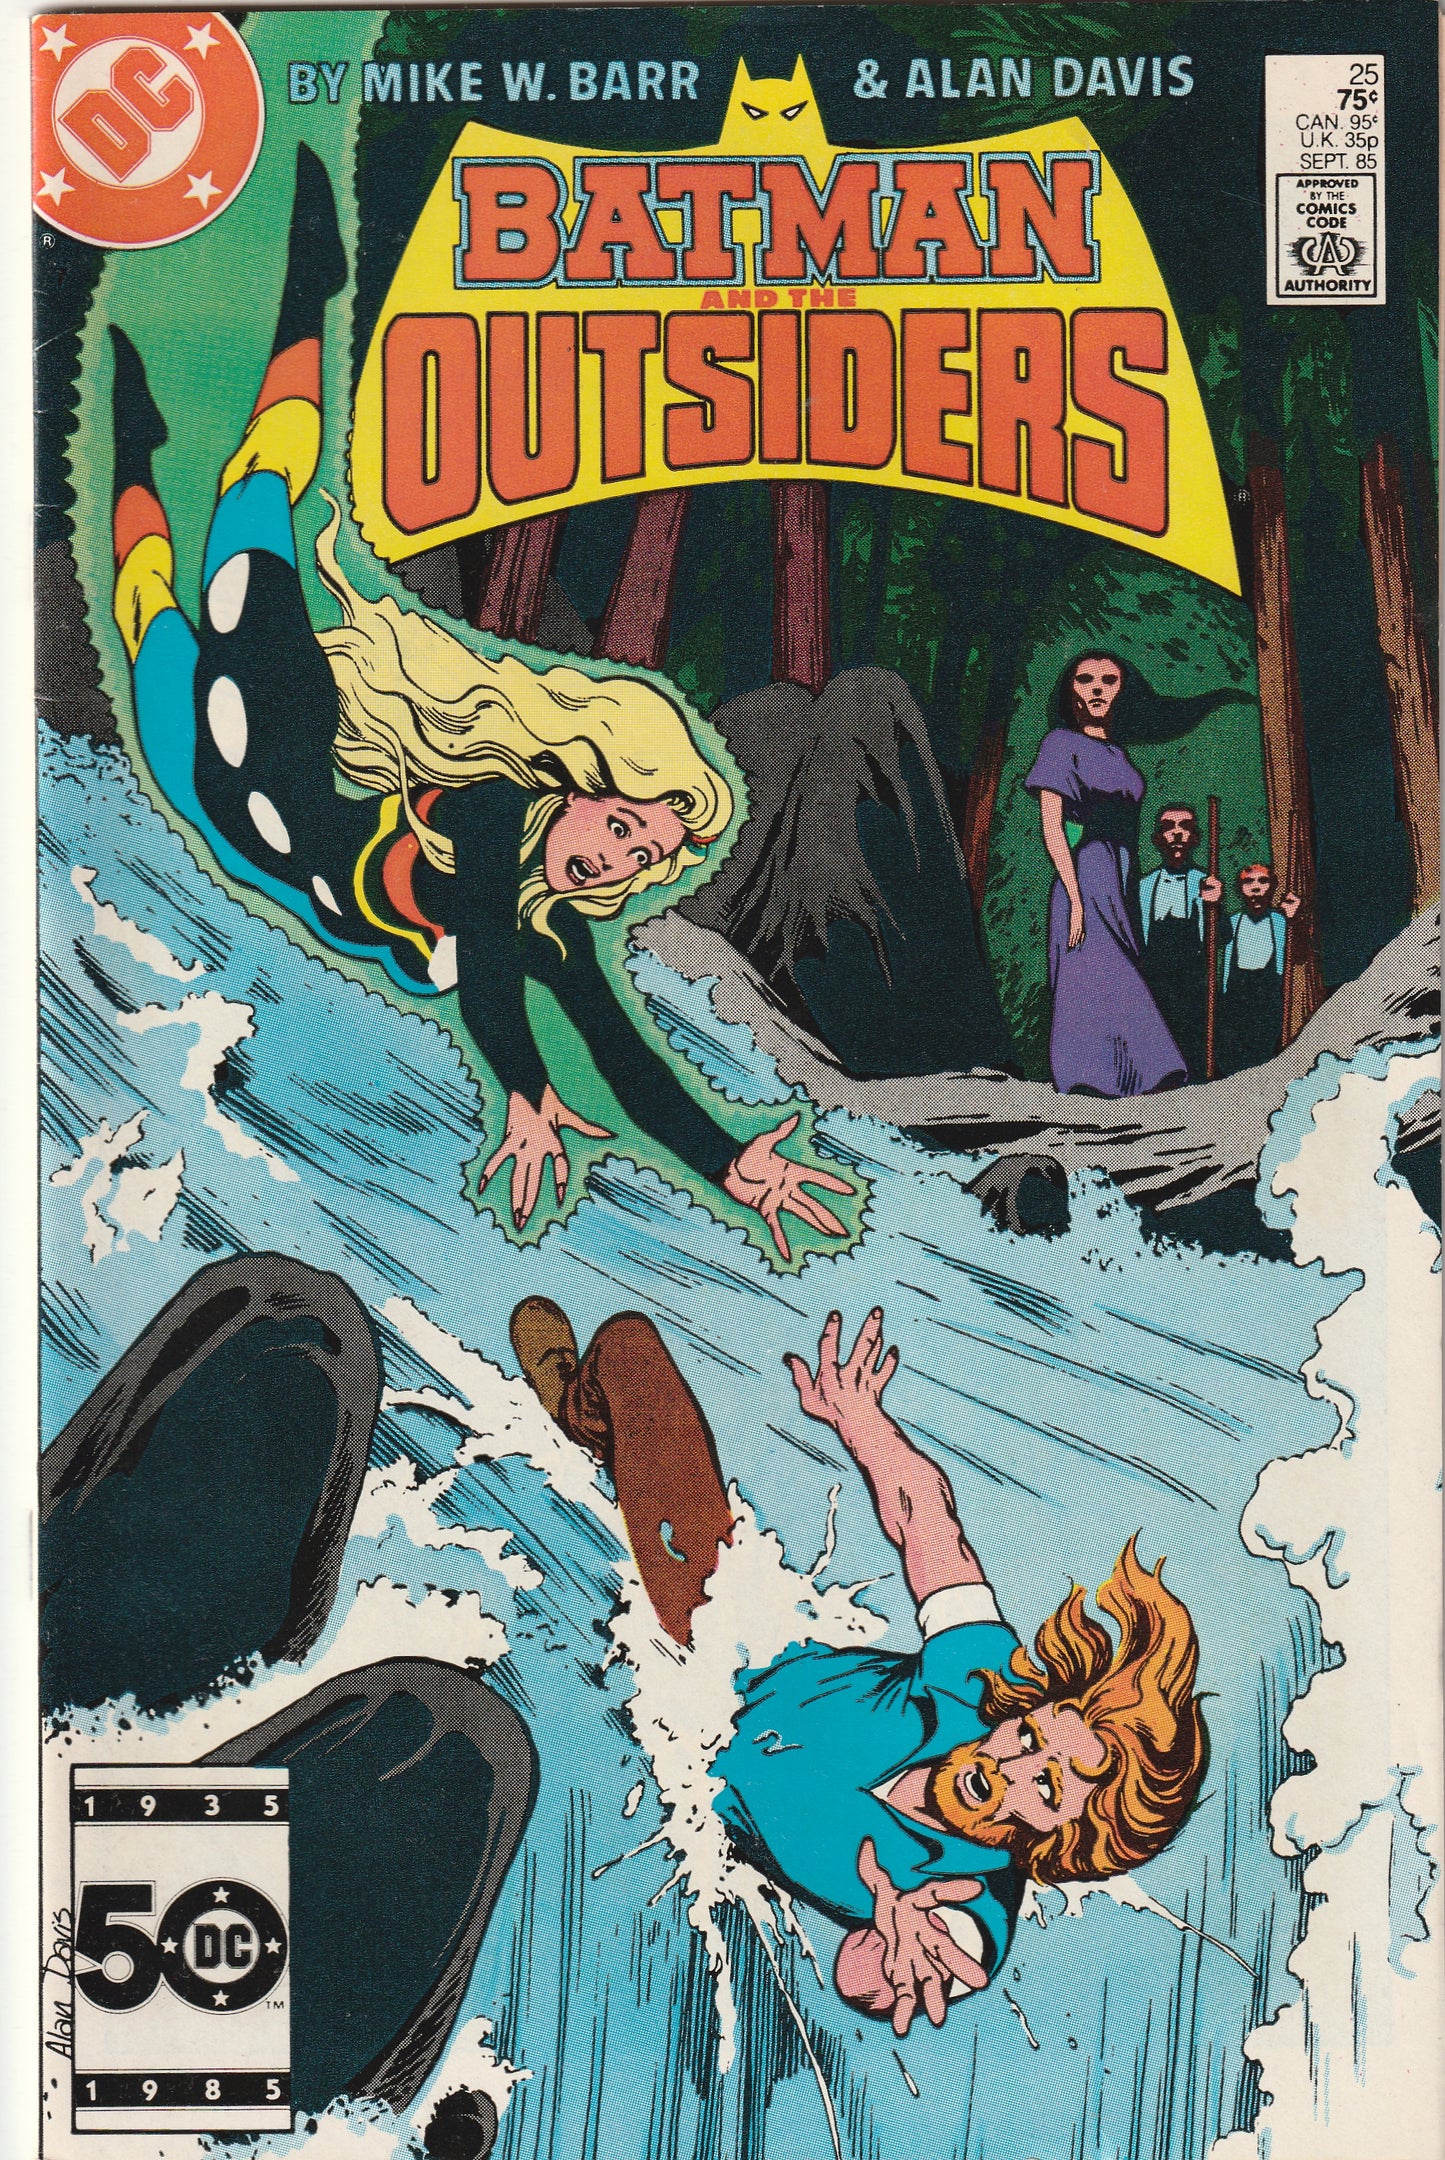 Batman And The Outsiders #25 (1985)